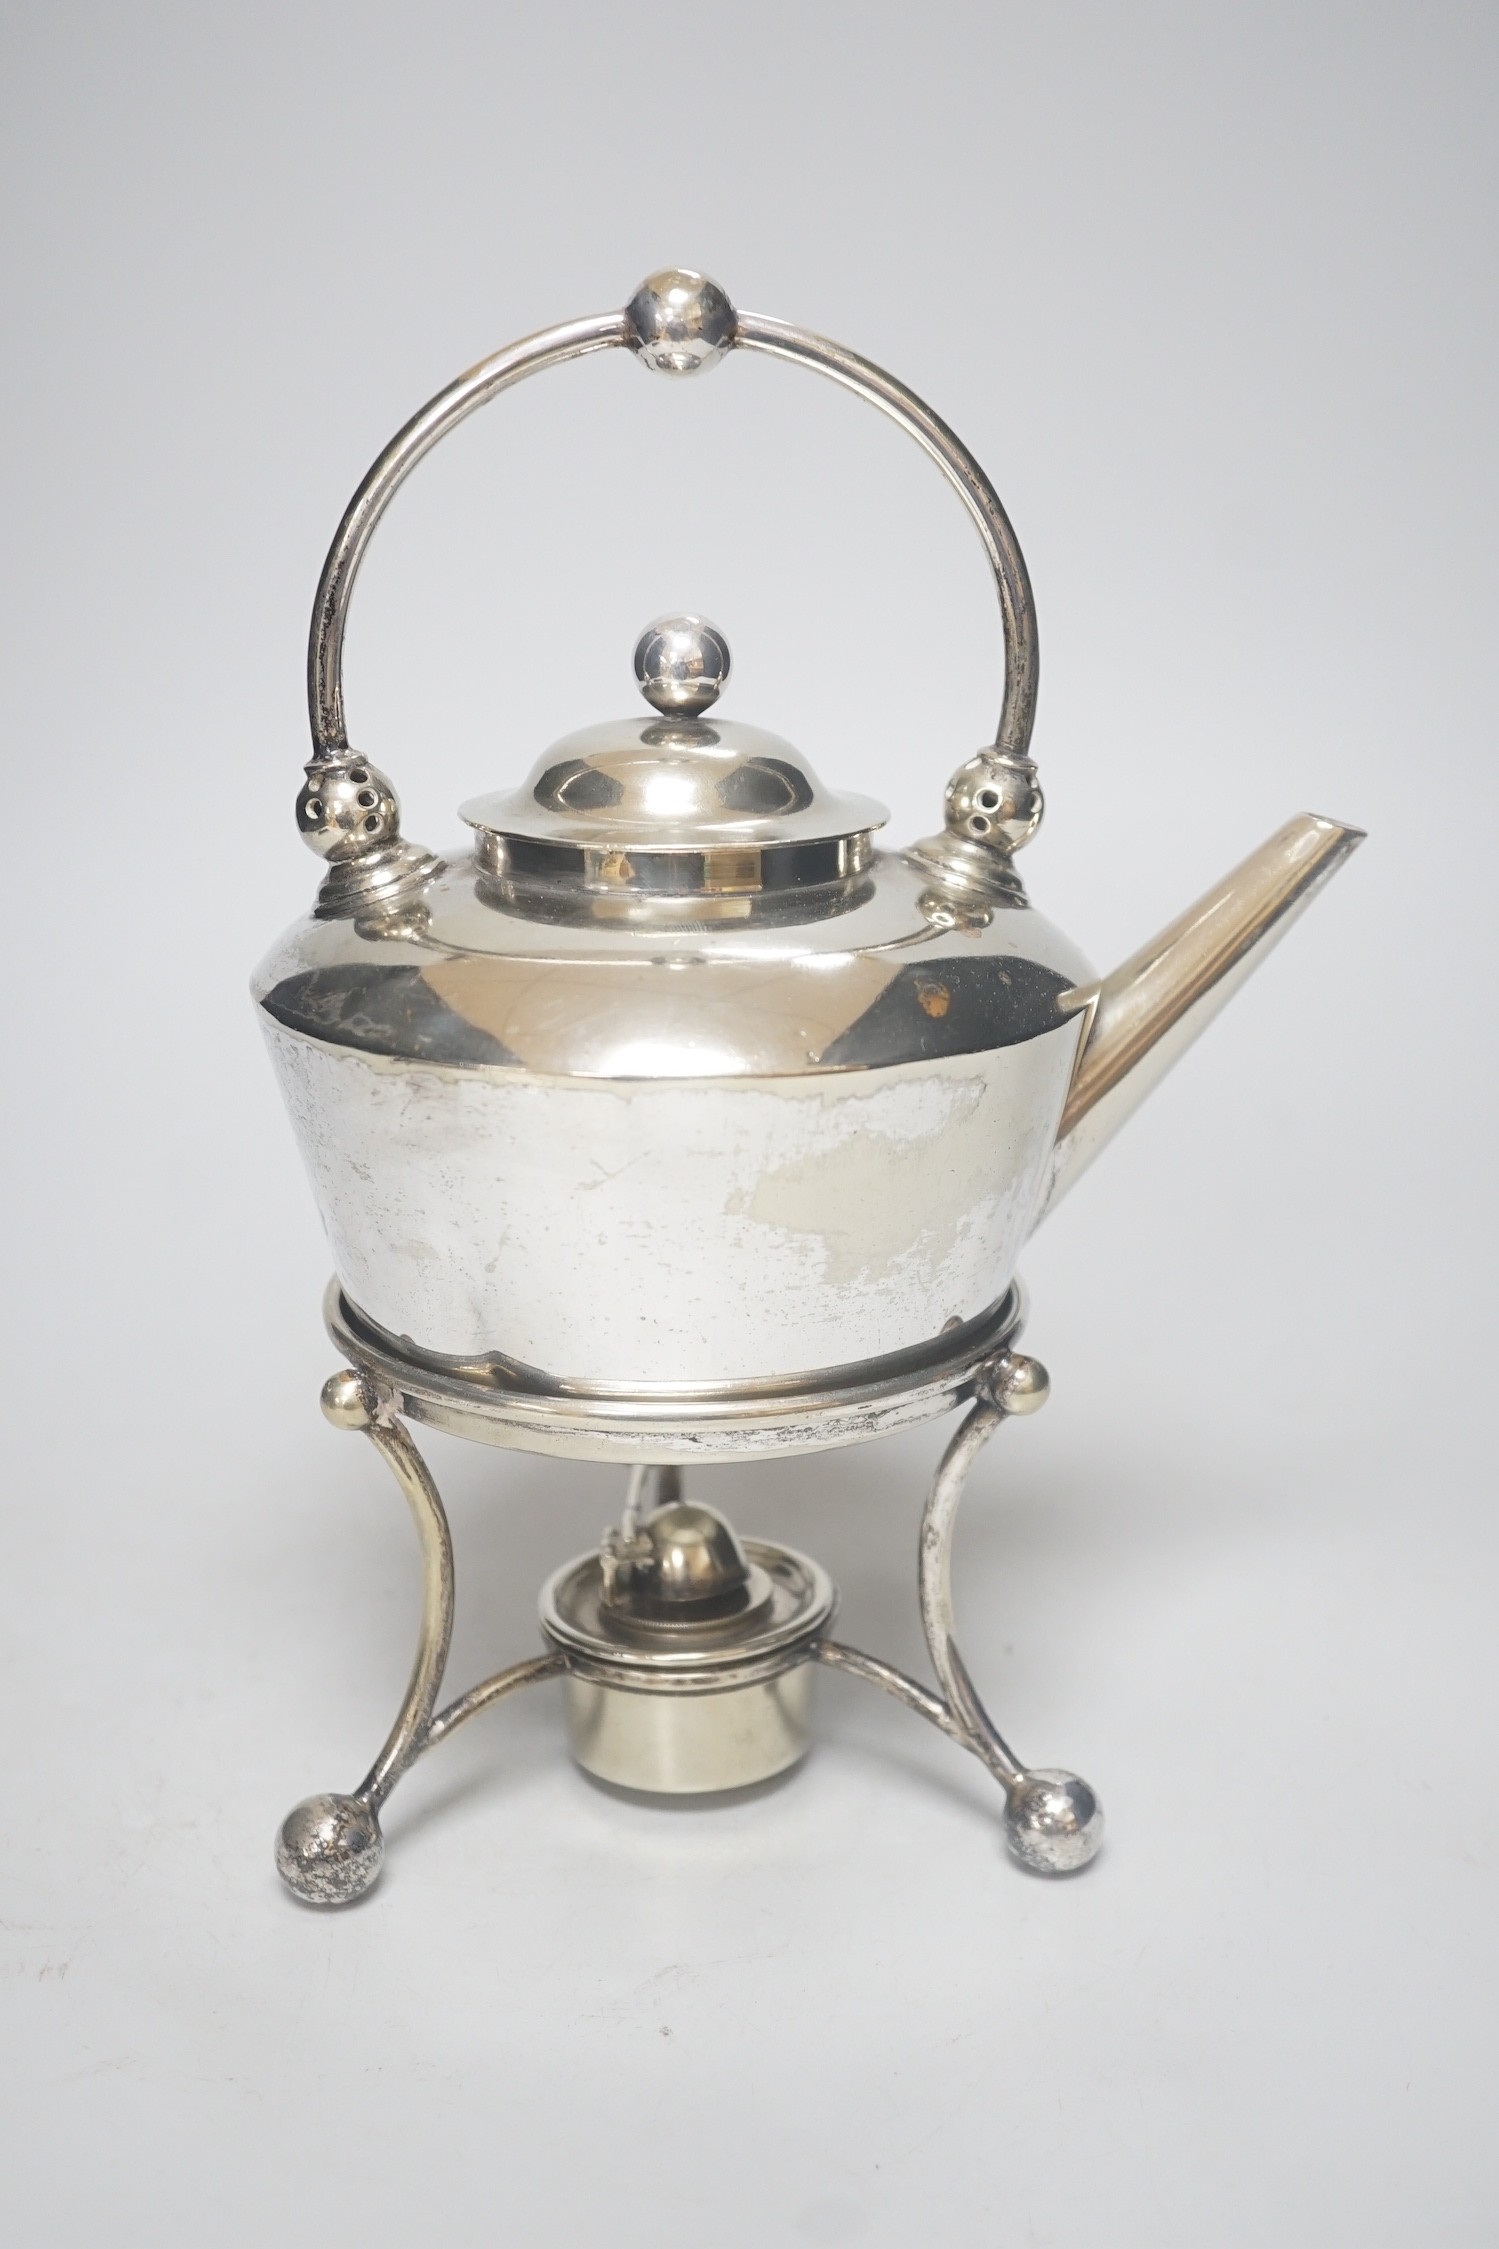 A Dresser style electroplate tea kettle, burner and stand